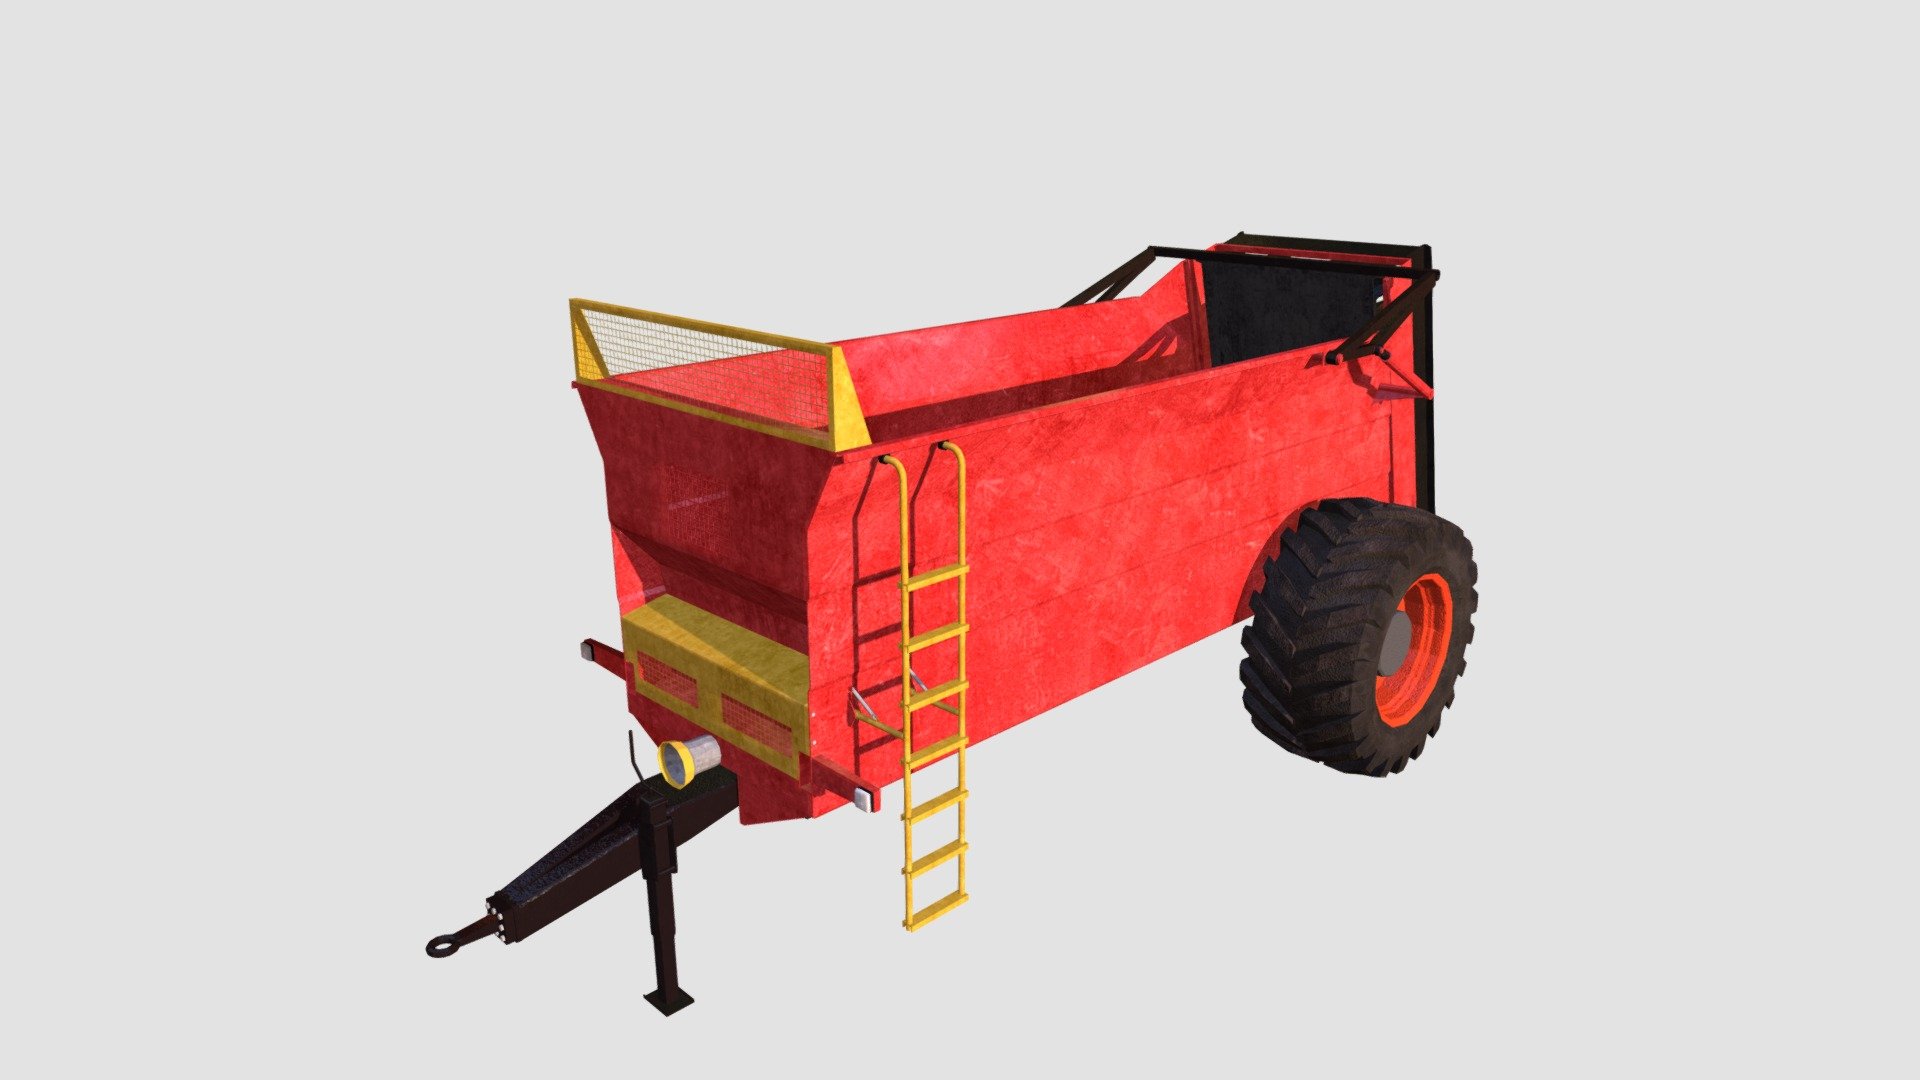 Highly detailed 3d model of agricultural trailer with textures, shaders and materials. It is ready to use, just put it into your scene 3d model